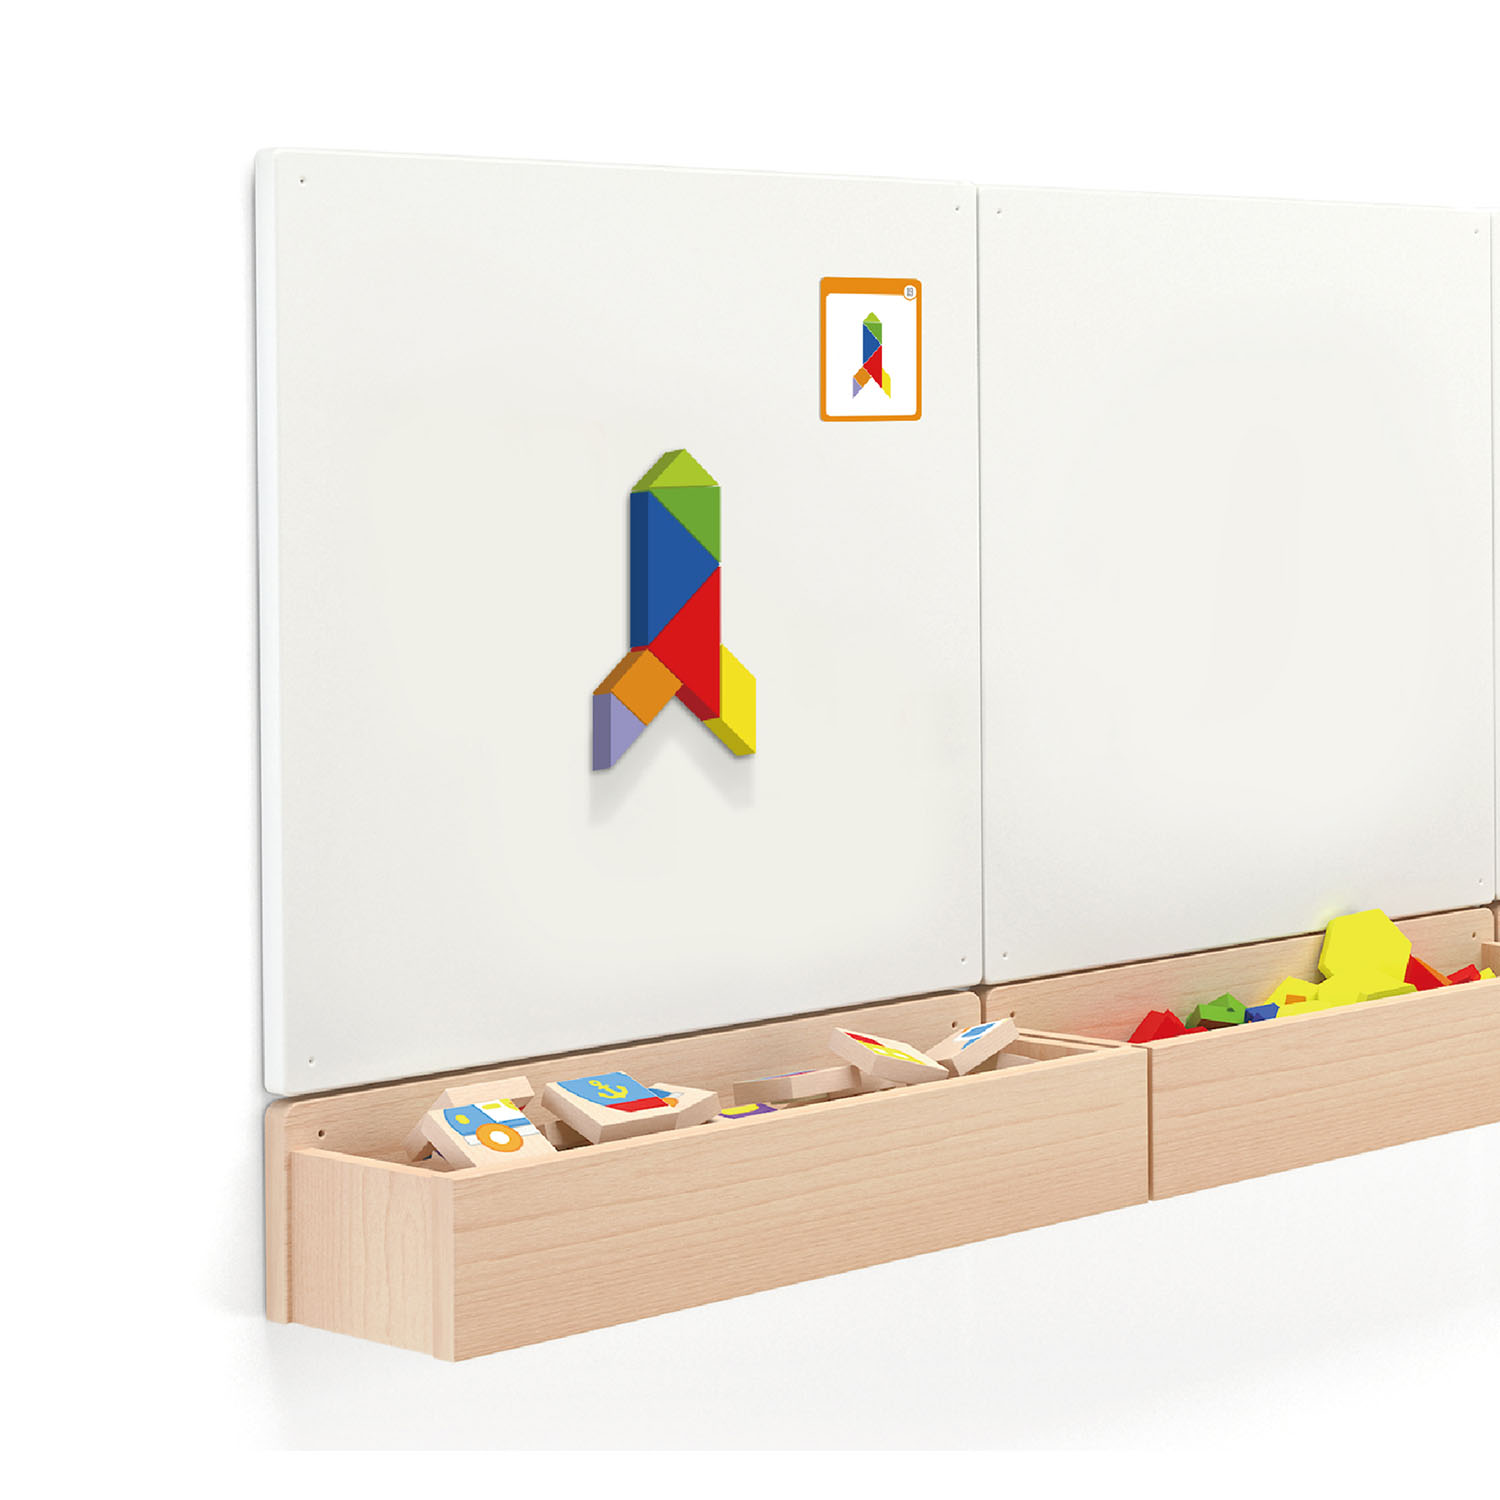 mgnetic wooden tangram and cards on magnetic white board